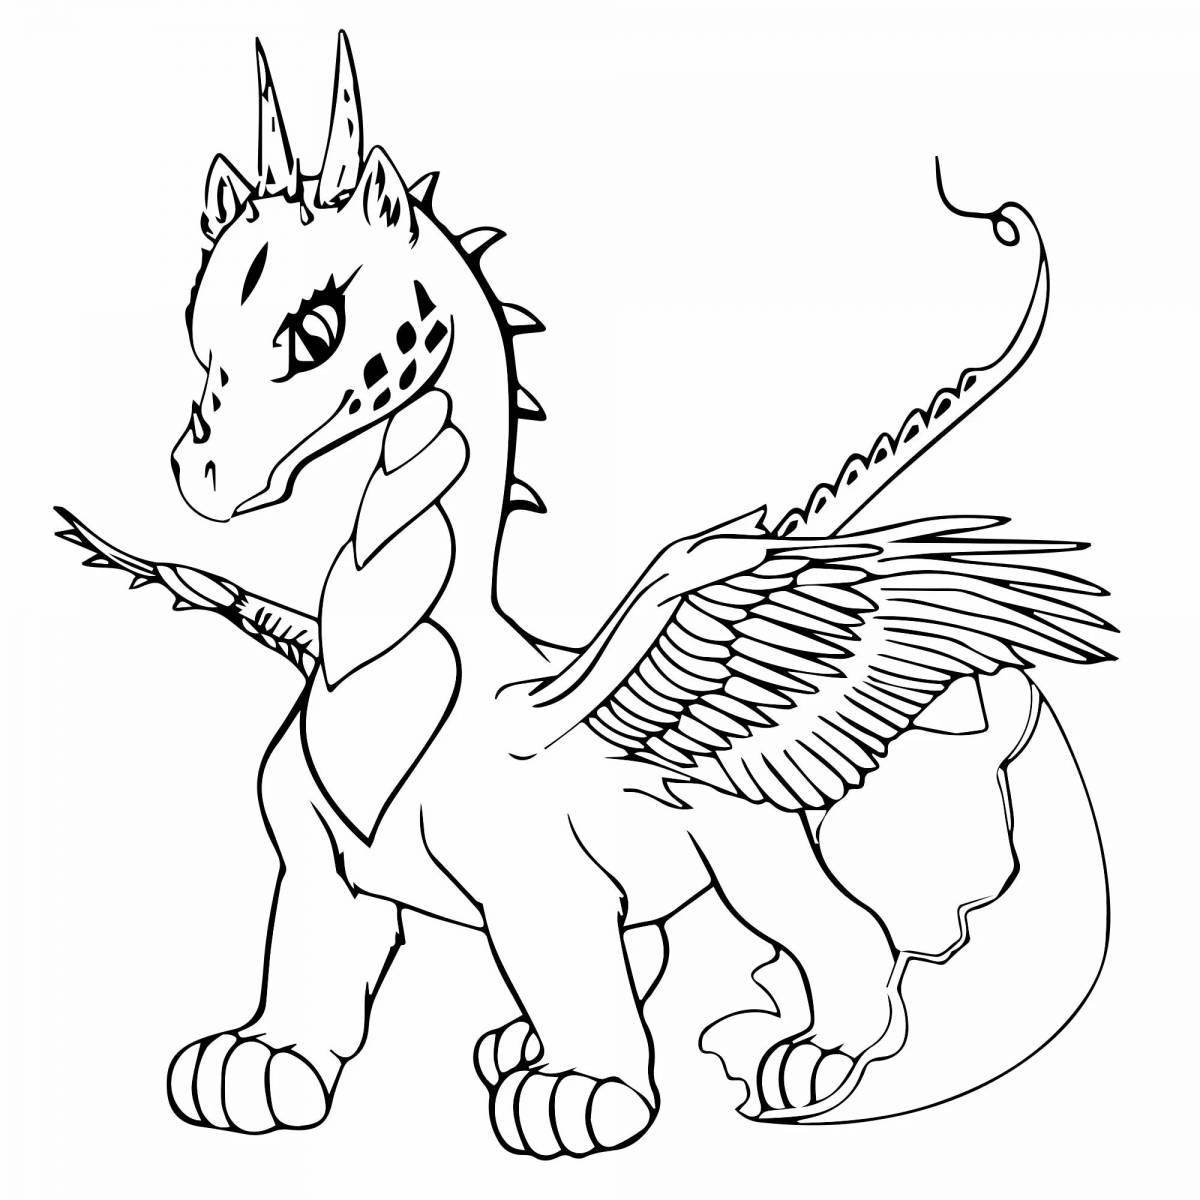 Ornate dragon coloring page